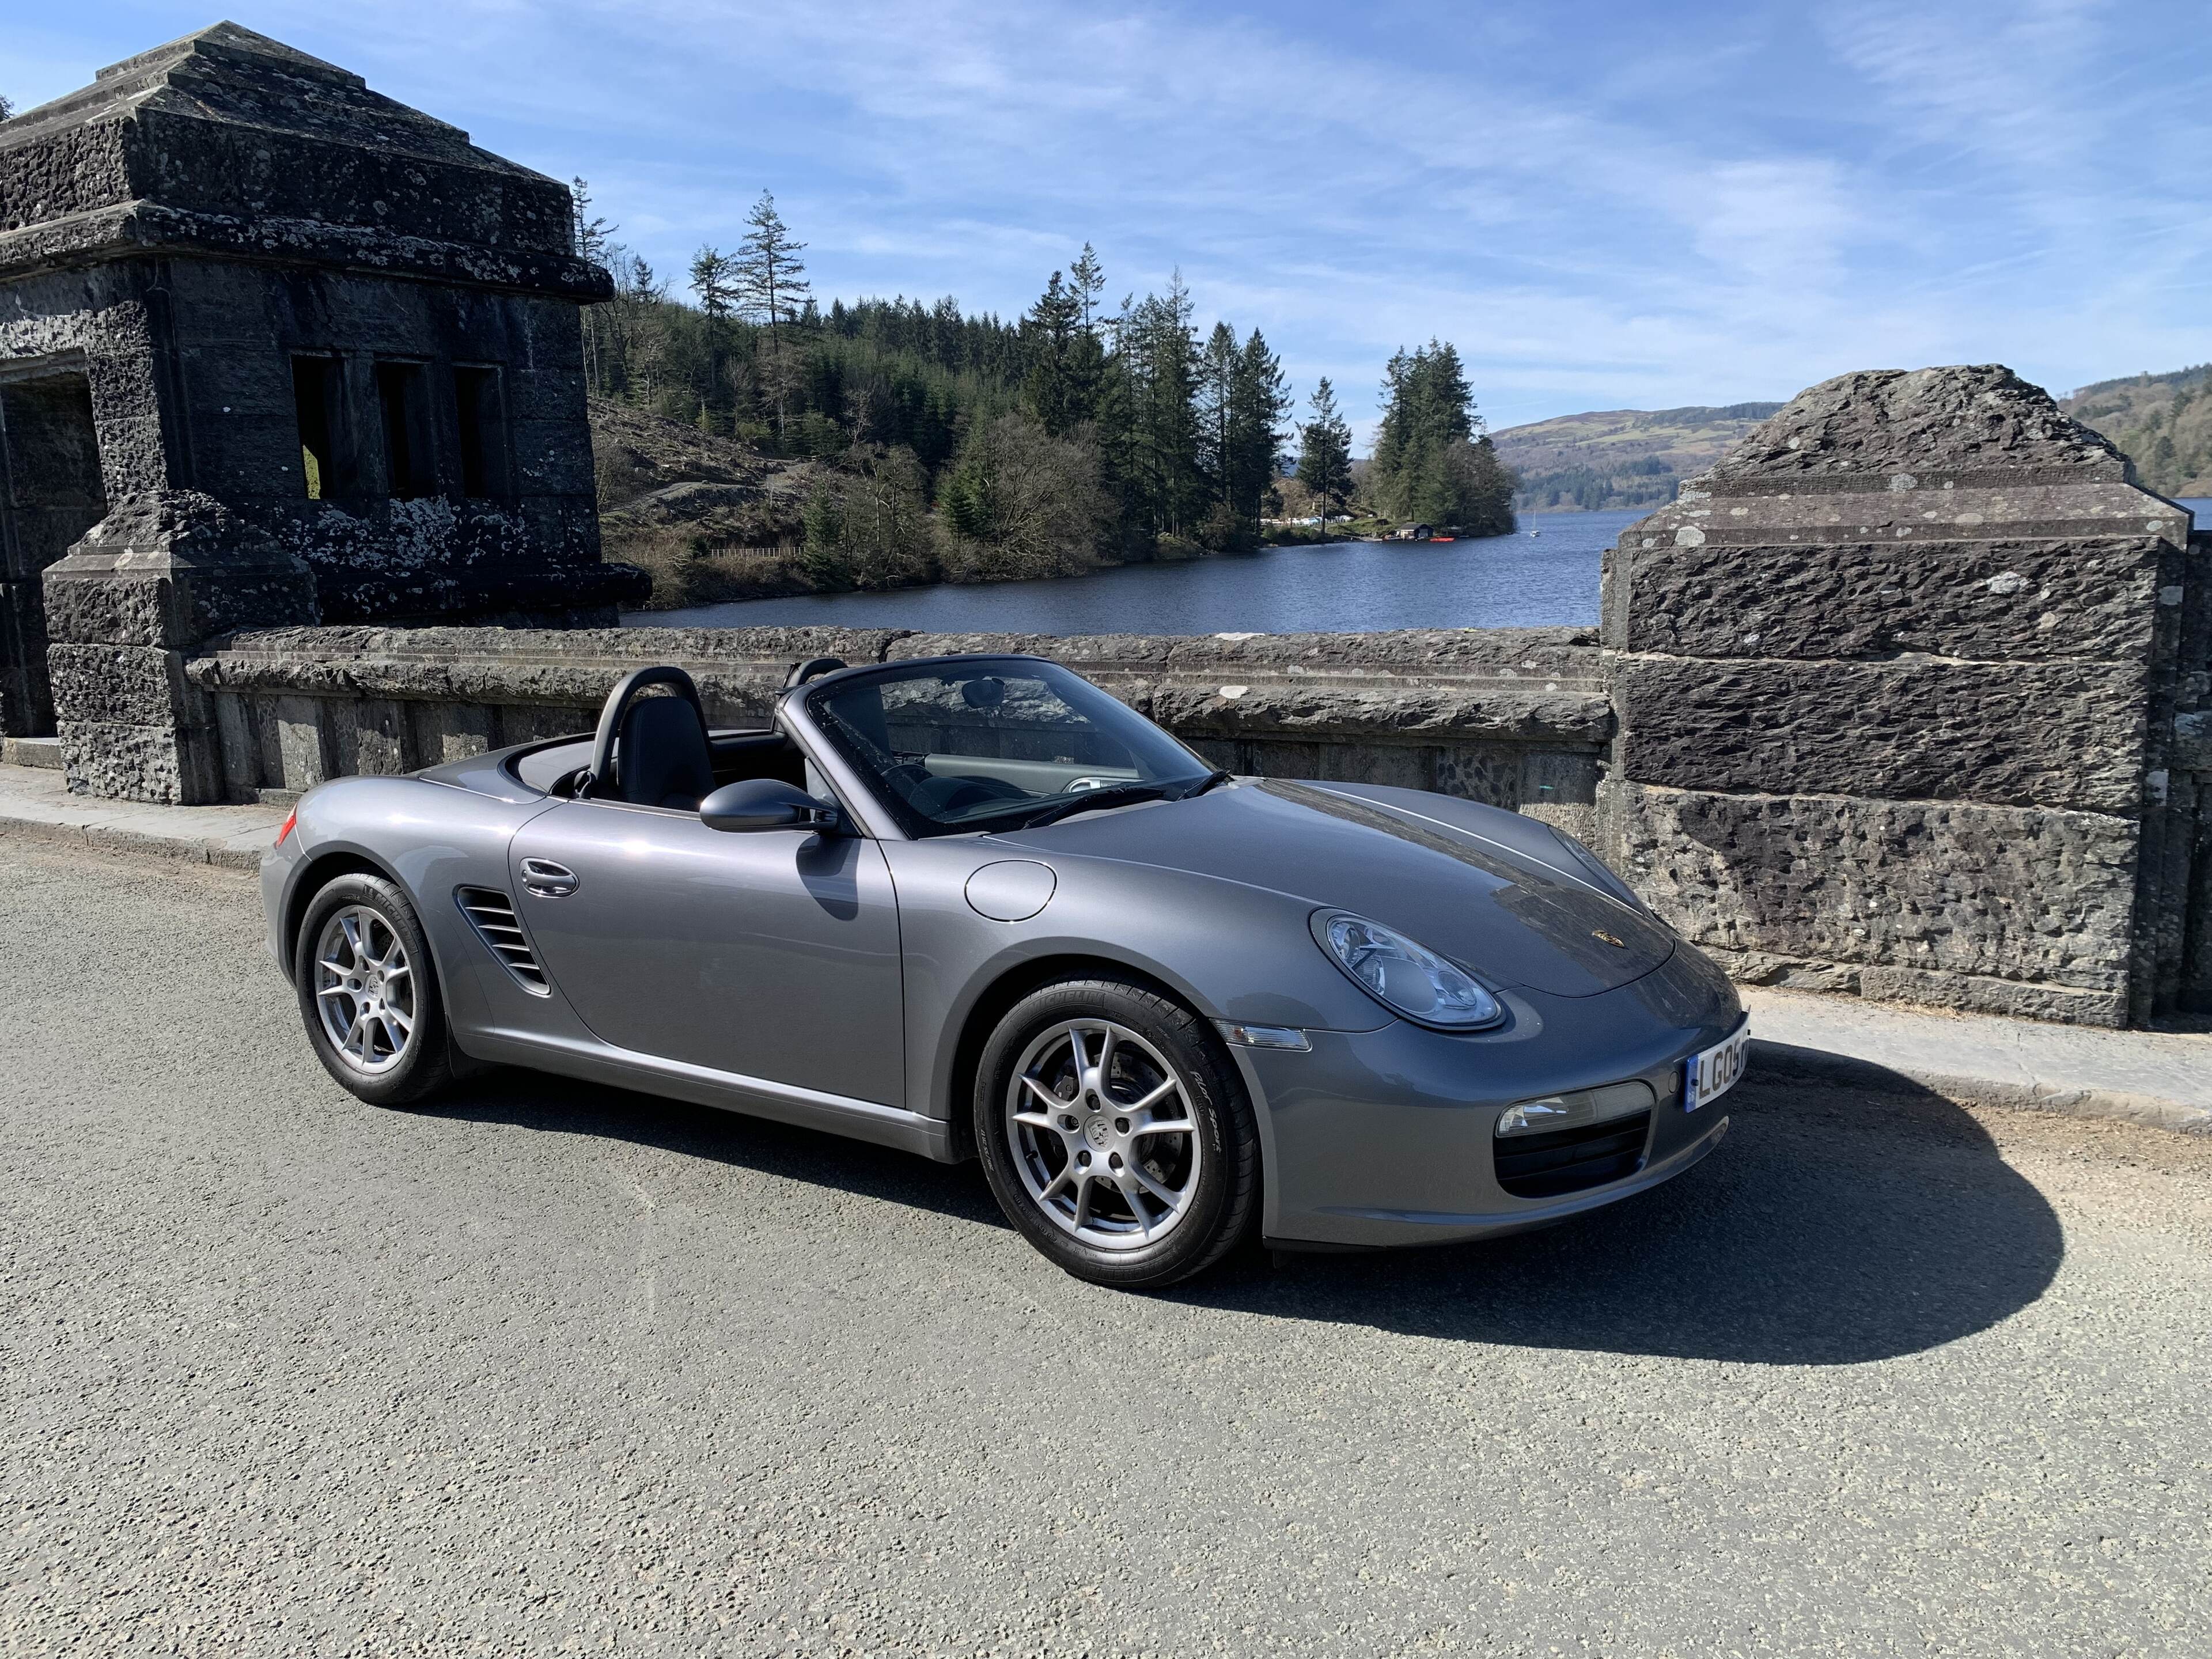 Pistonheads - The image shows a convertible sports car parked by the side of a road. The car has a sleek design with a silver color and the top is down, allowing us to see the interior. It's positioned in front of a stone structure that could be part of an old building or bridge. The environment suggests it might be near a lake or a river, given the presence of water in the background. There are no people visible in the image.